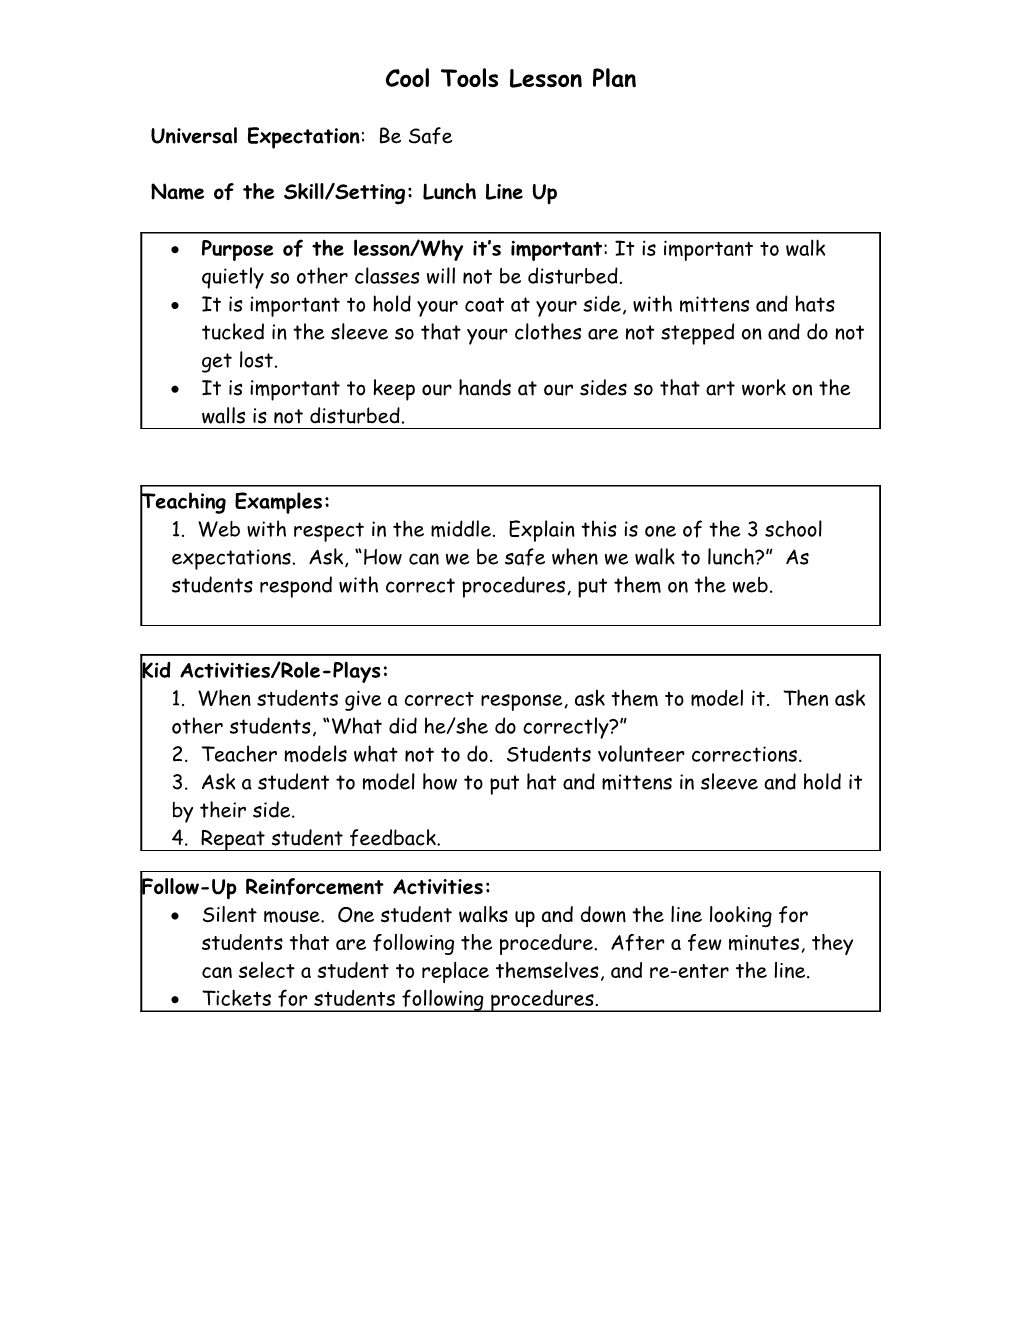 Cool Tools Lesson Plan s1